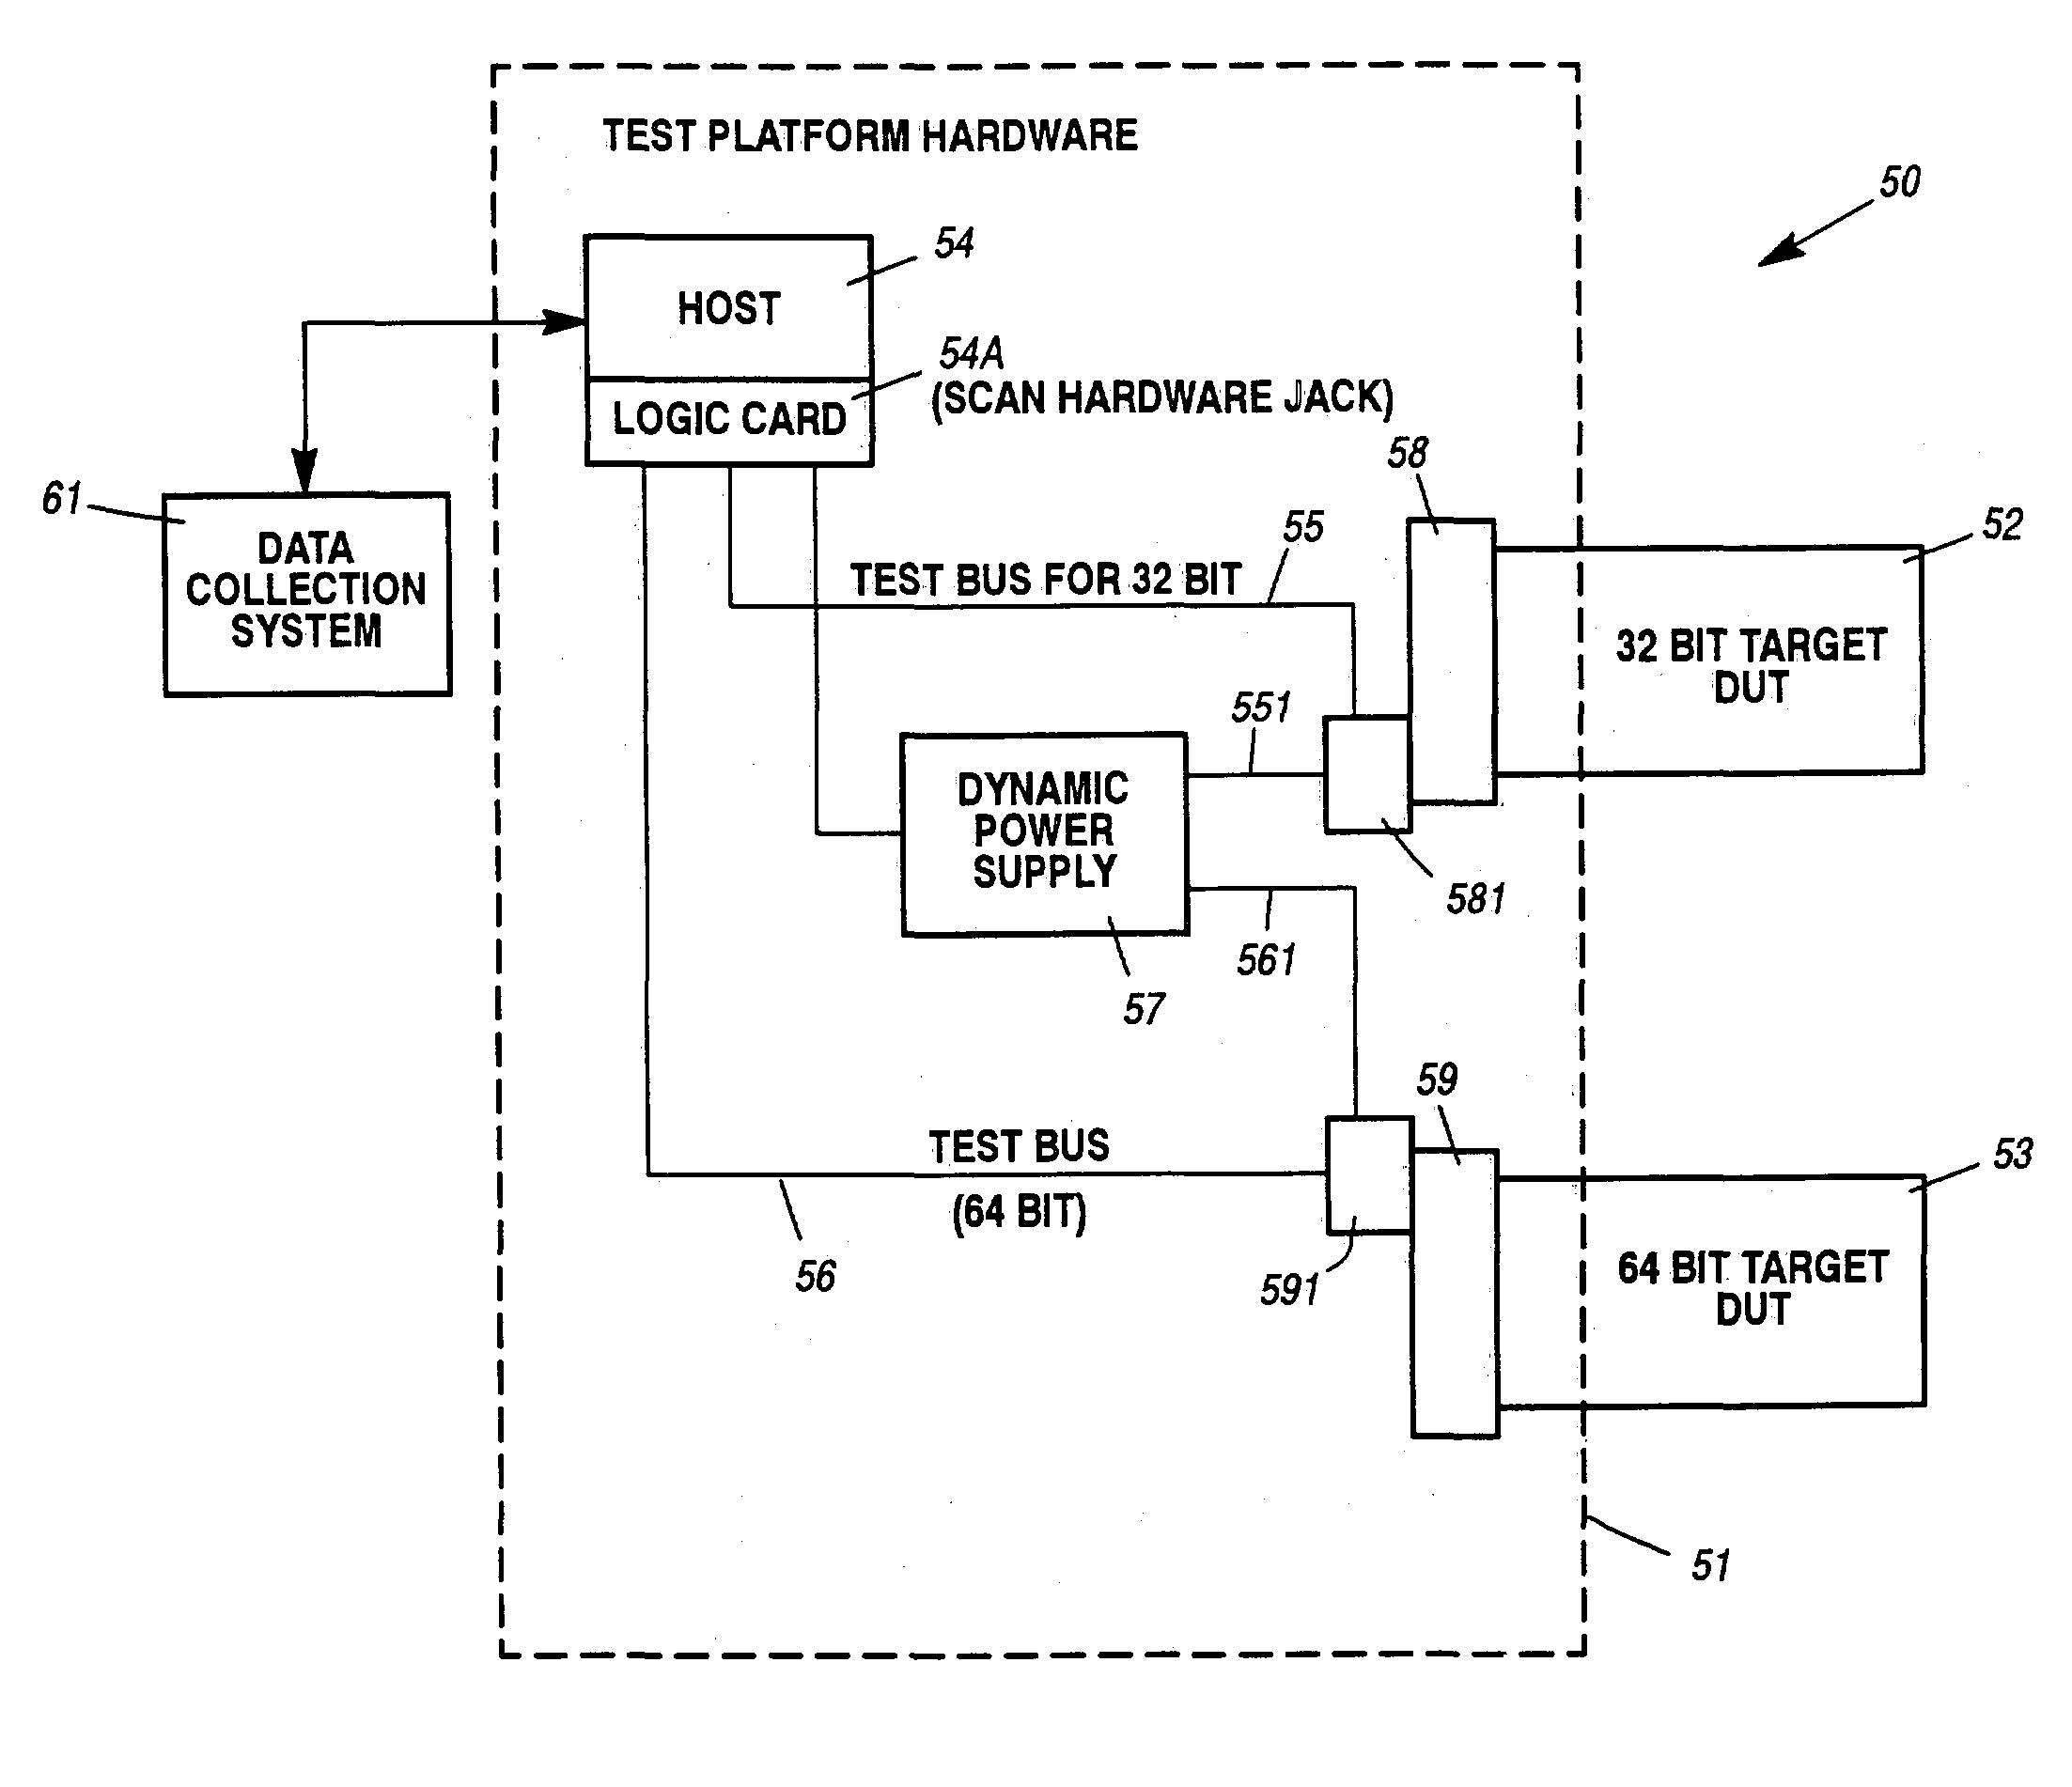 Test apparatus to facilitate building and testing complex computer products with contract manufacturers without proprietary information